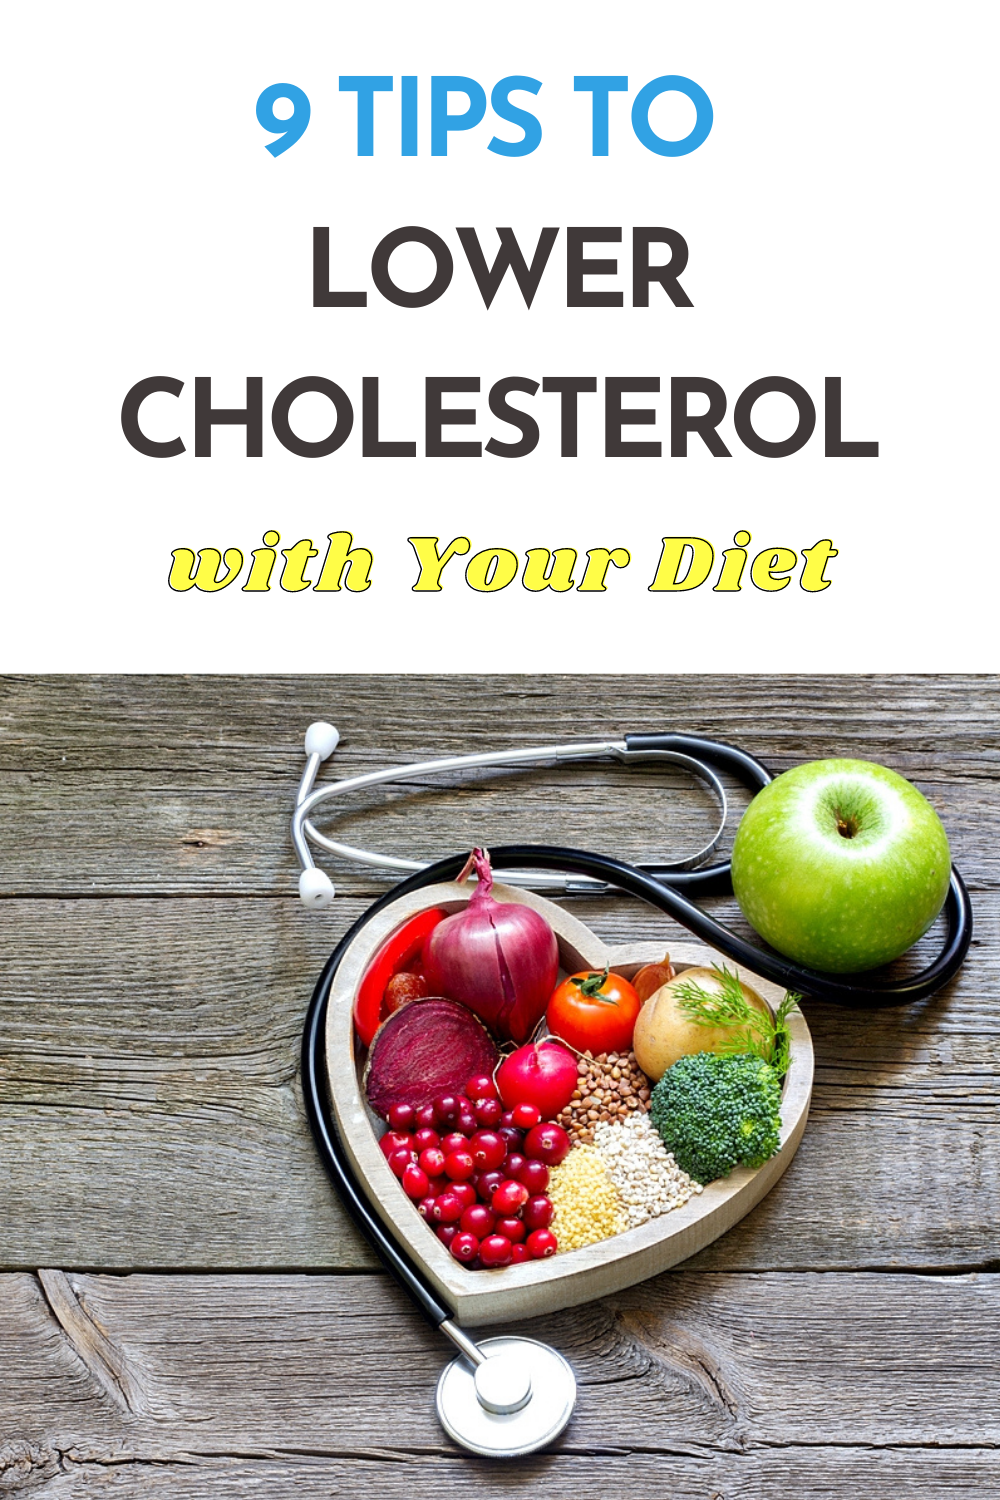 9 Tips to Lower Cholesterol with Your Diet